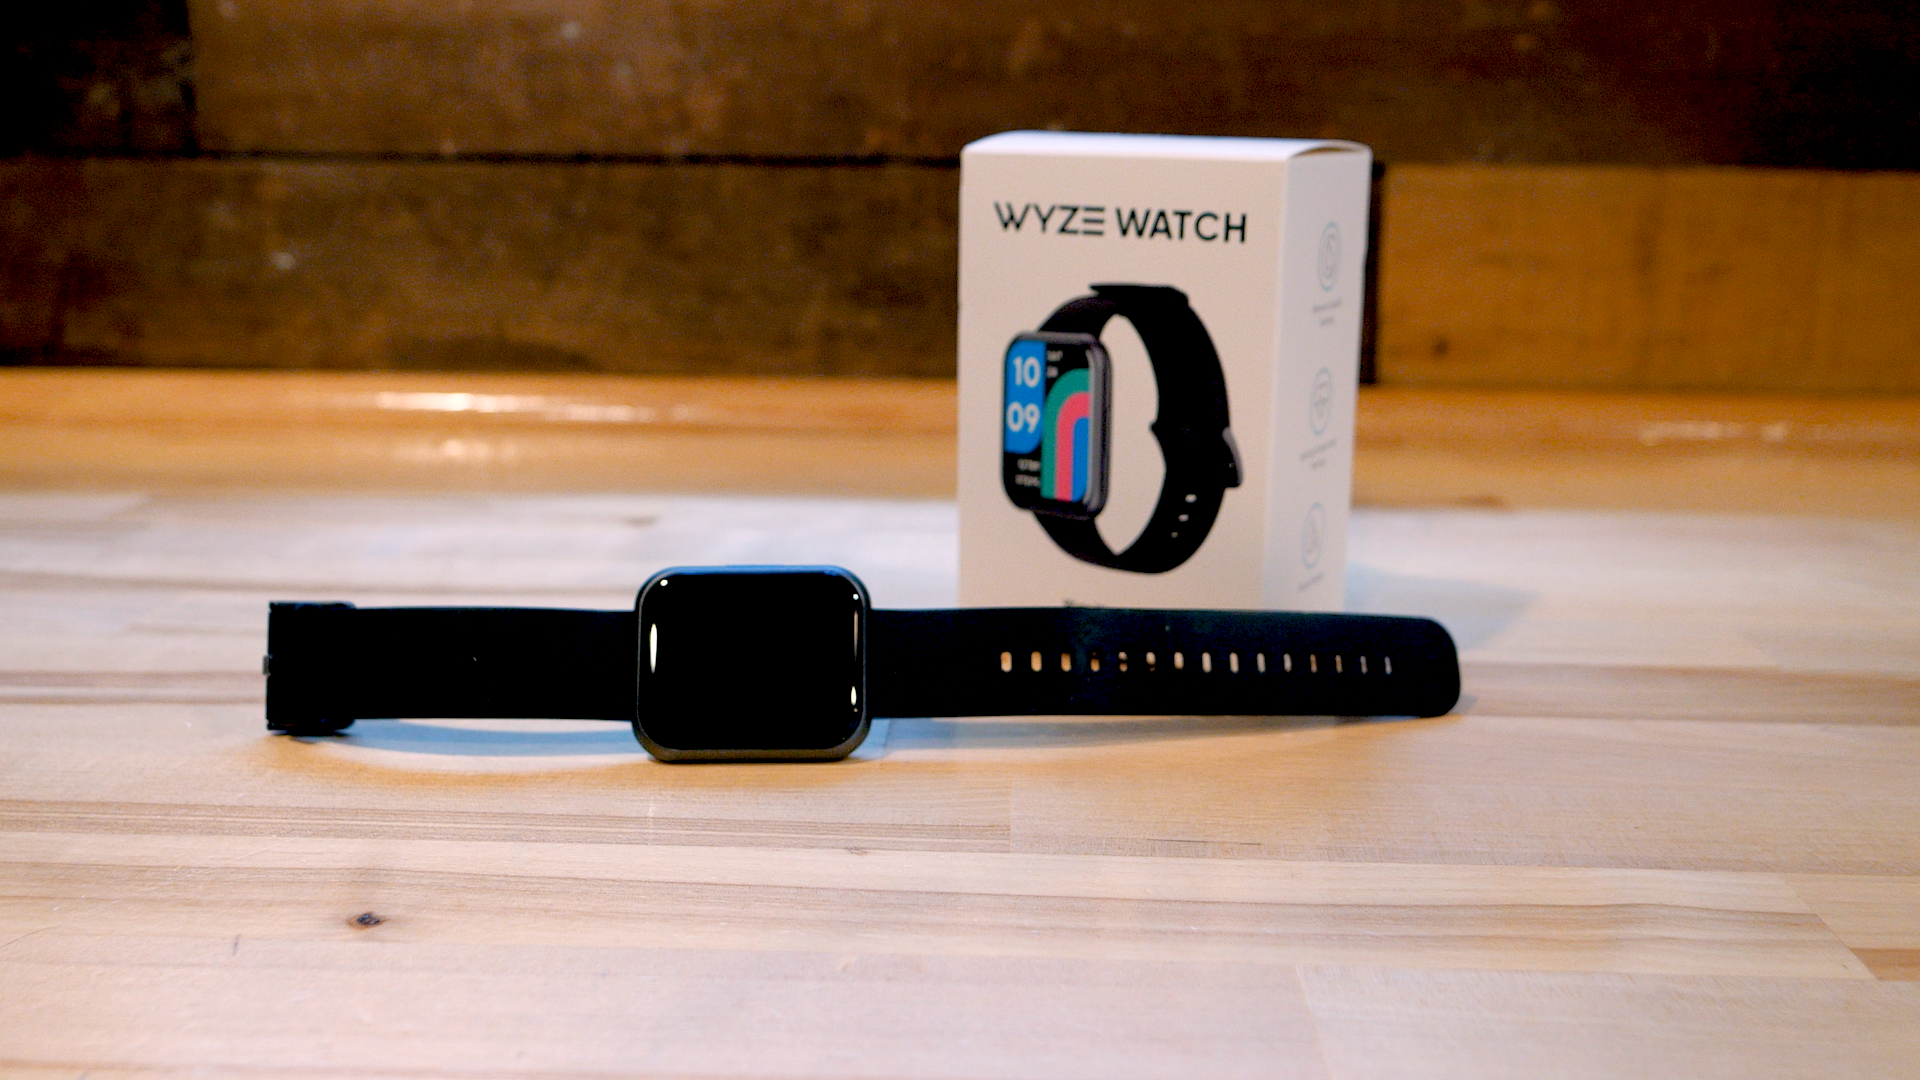 We try out the WYZE watch: It’s a watch that includes a heart rate monitor, fitness tracker, blood oxygen monitor. Does it work? We Try It Before You Buy It!